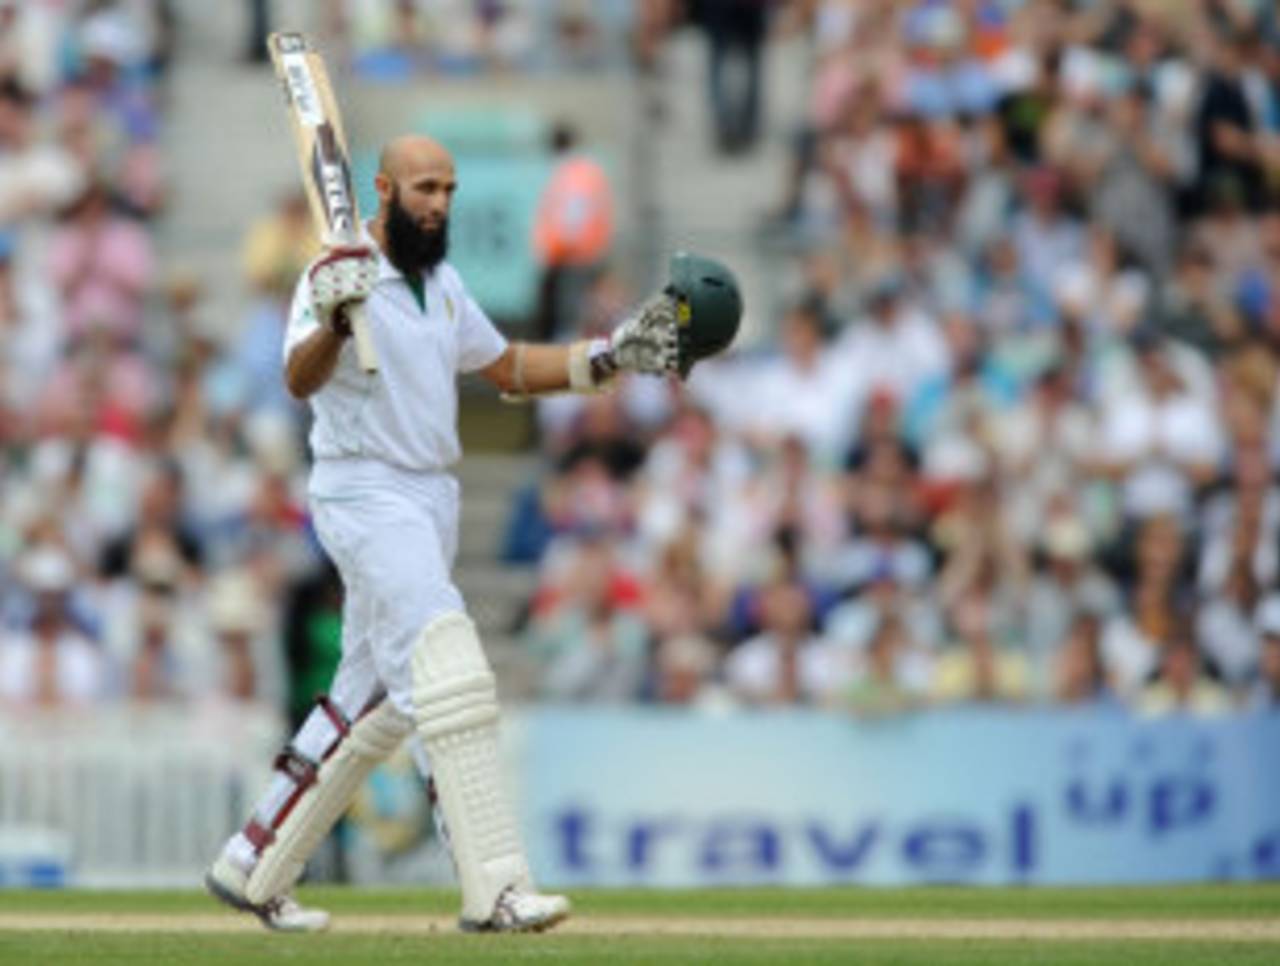 Hashim Amla recorded his 15th century in Tests, England v South Africa, 1st Investec Test, The Oval, 3rd day, July 21, 2012